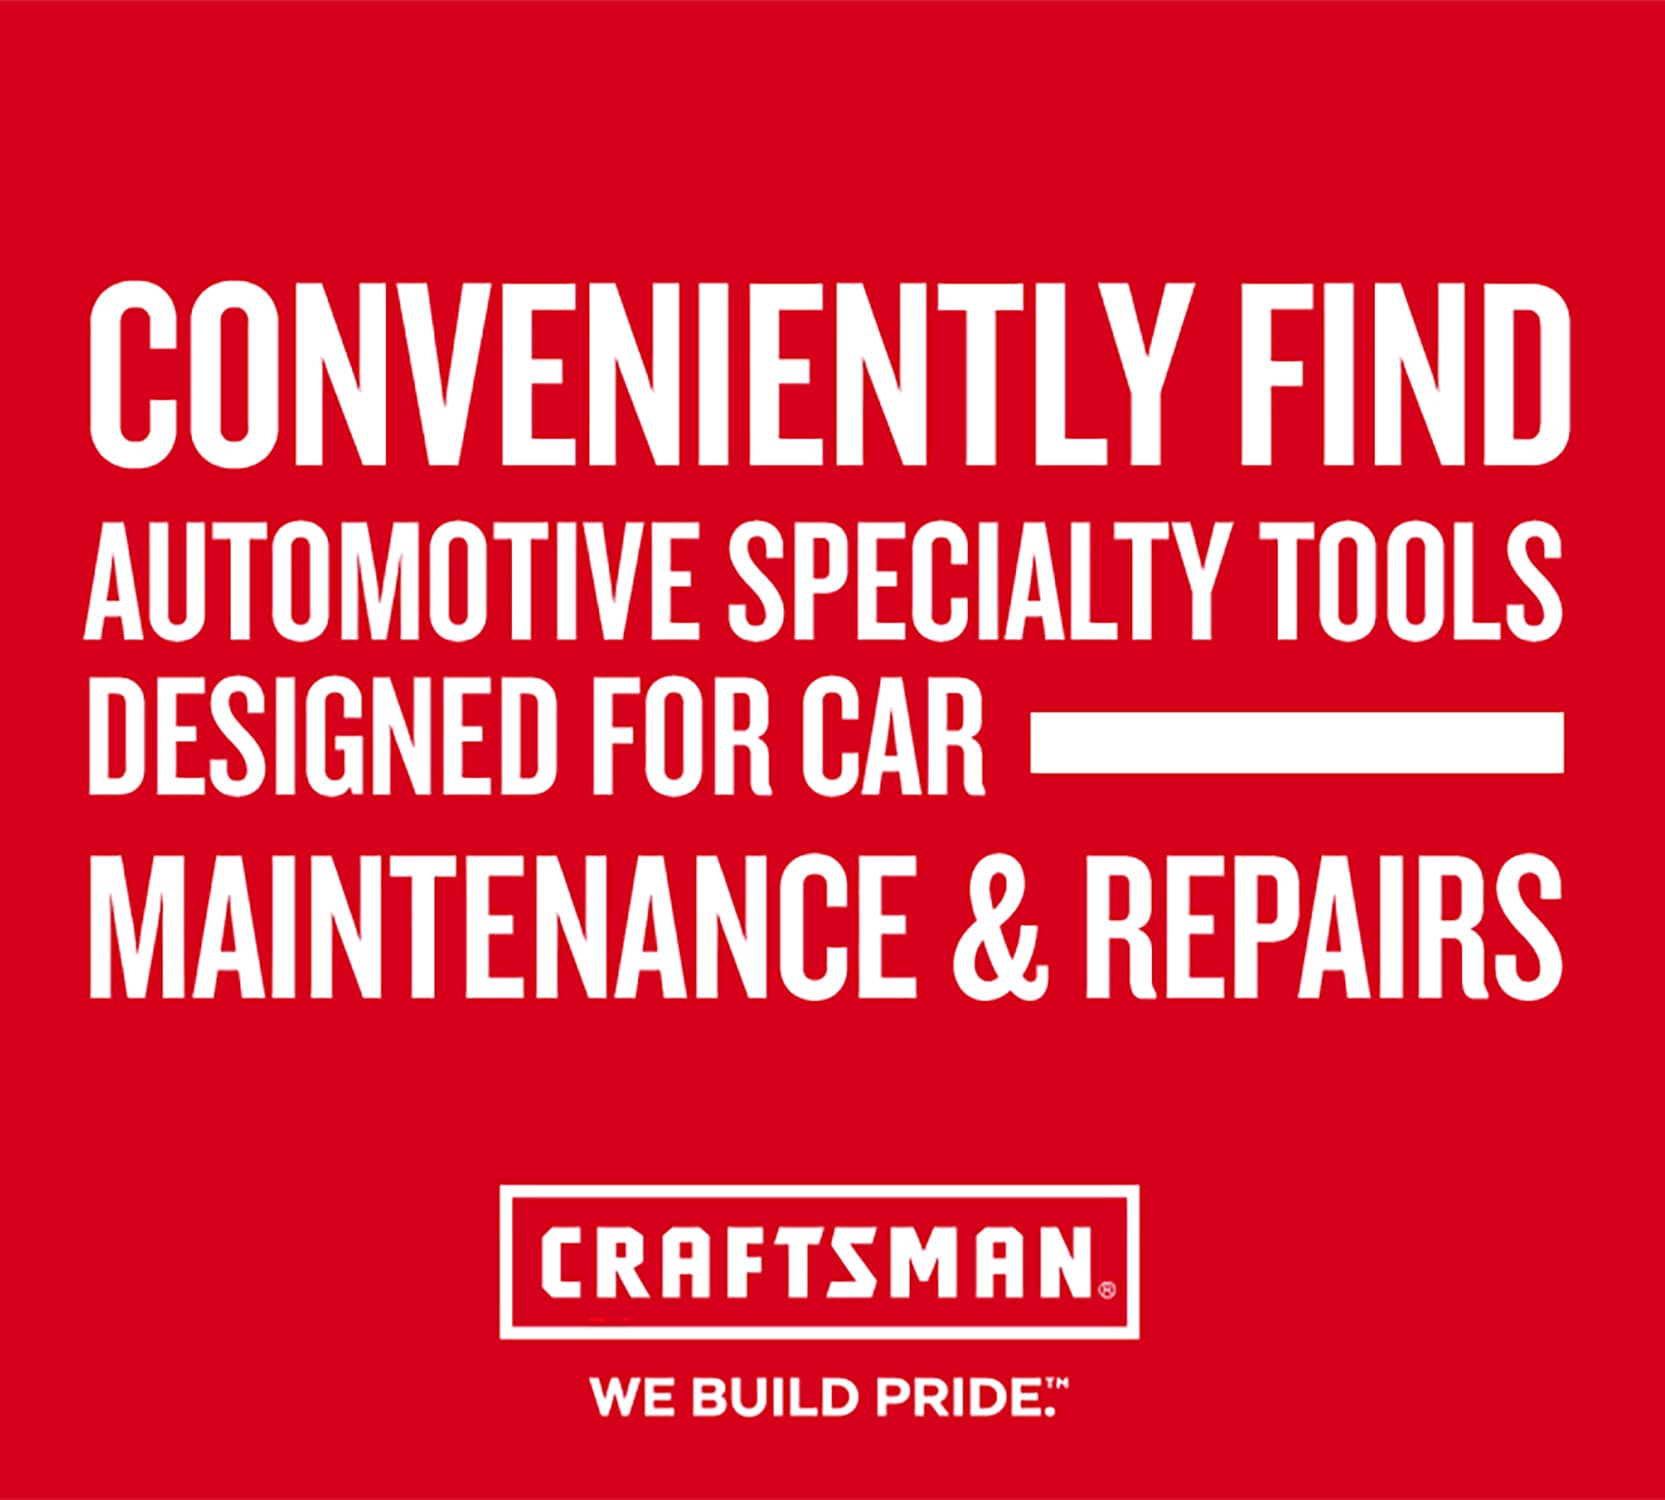 CRAFTSMAN Automotive Stud Extractor in the Automotive Hand Tools department  at